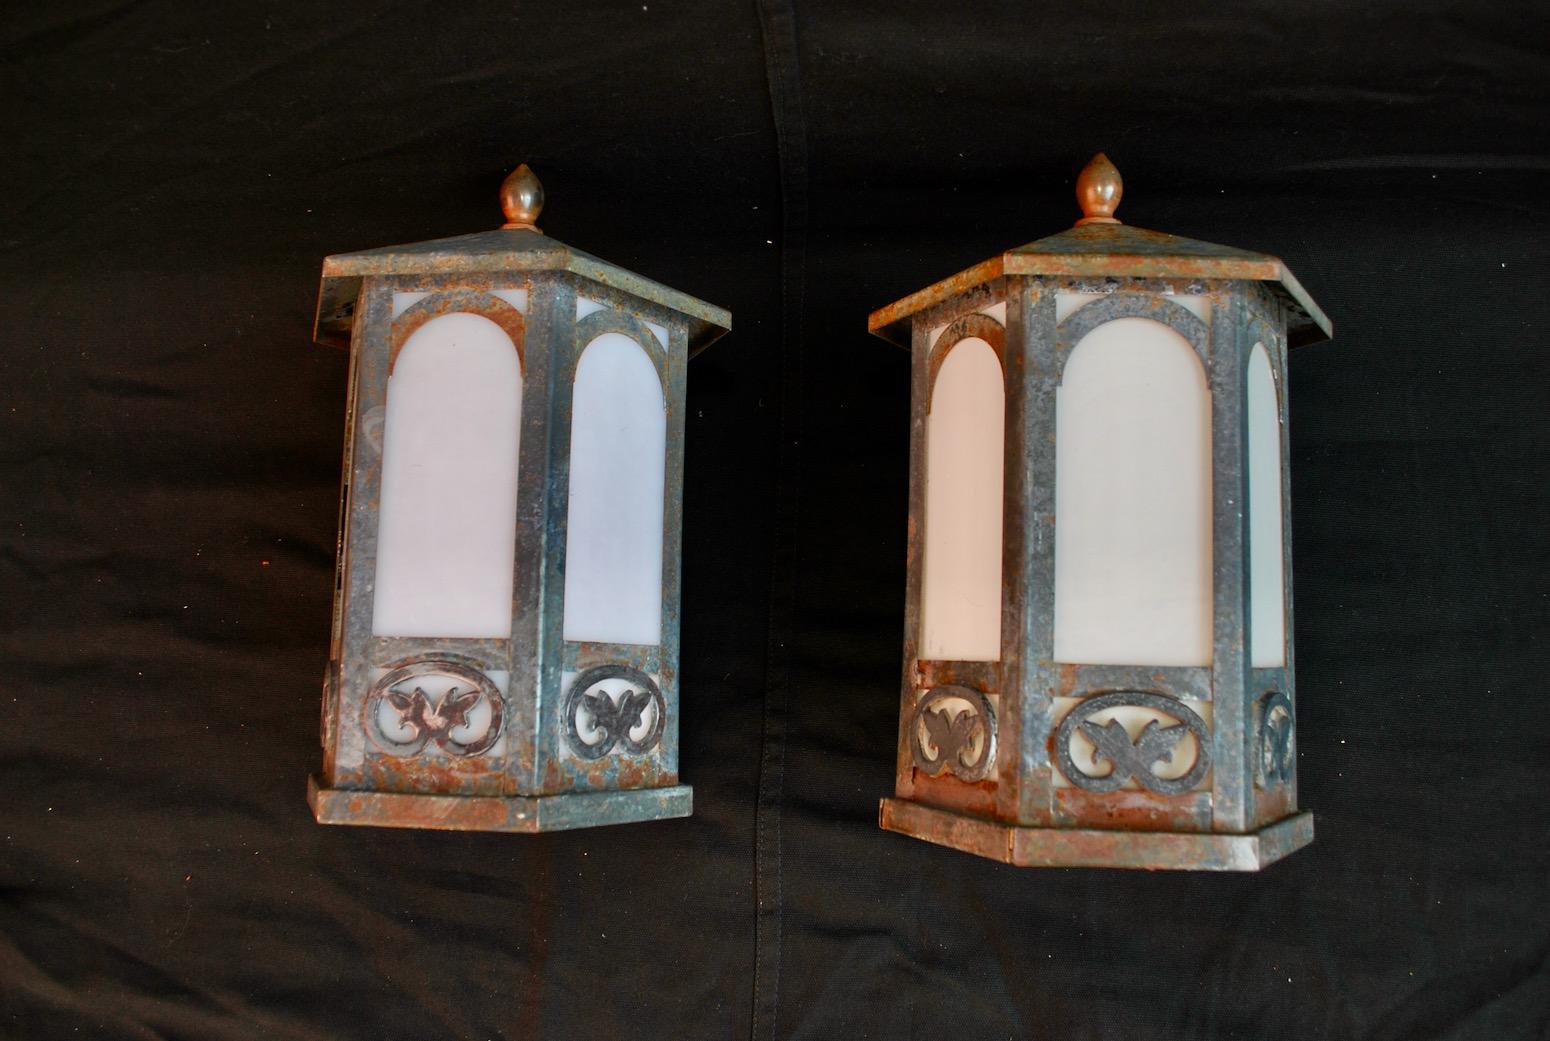 All our sconces and chandeliers are rewired, they have been stripped, they had 20 coat of old paint since 1920's, they can be repainted, I rather leave it to the buyer.